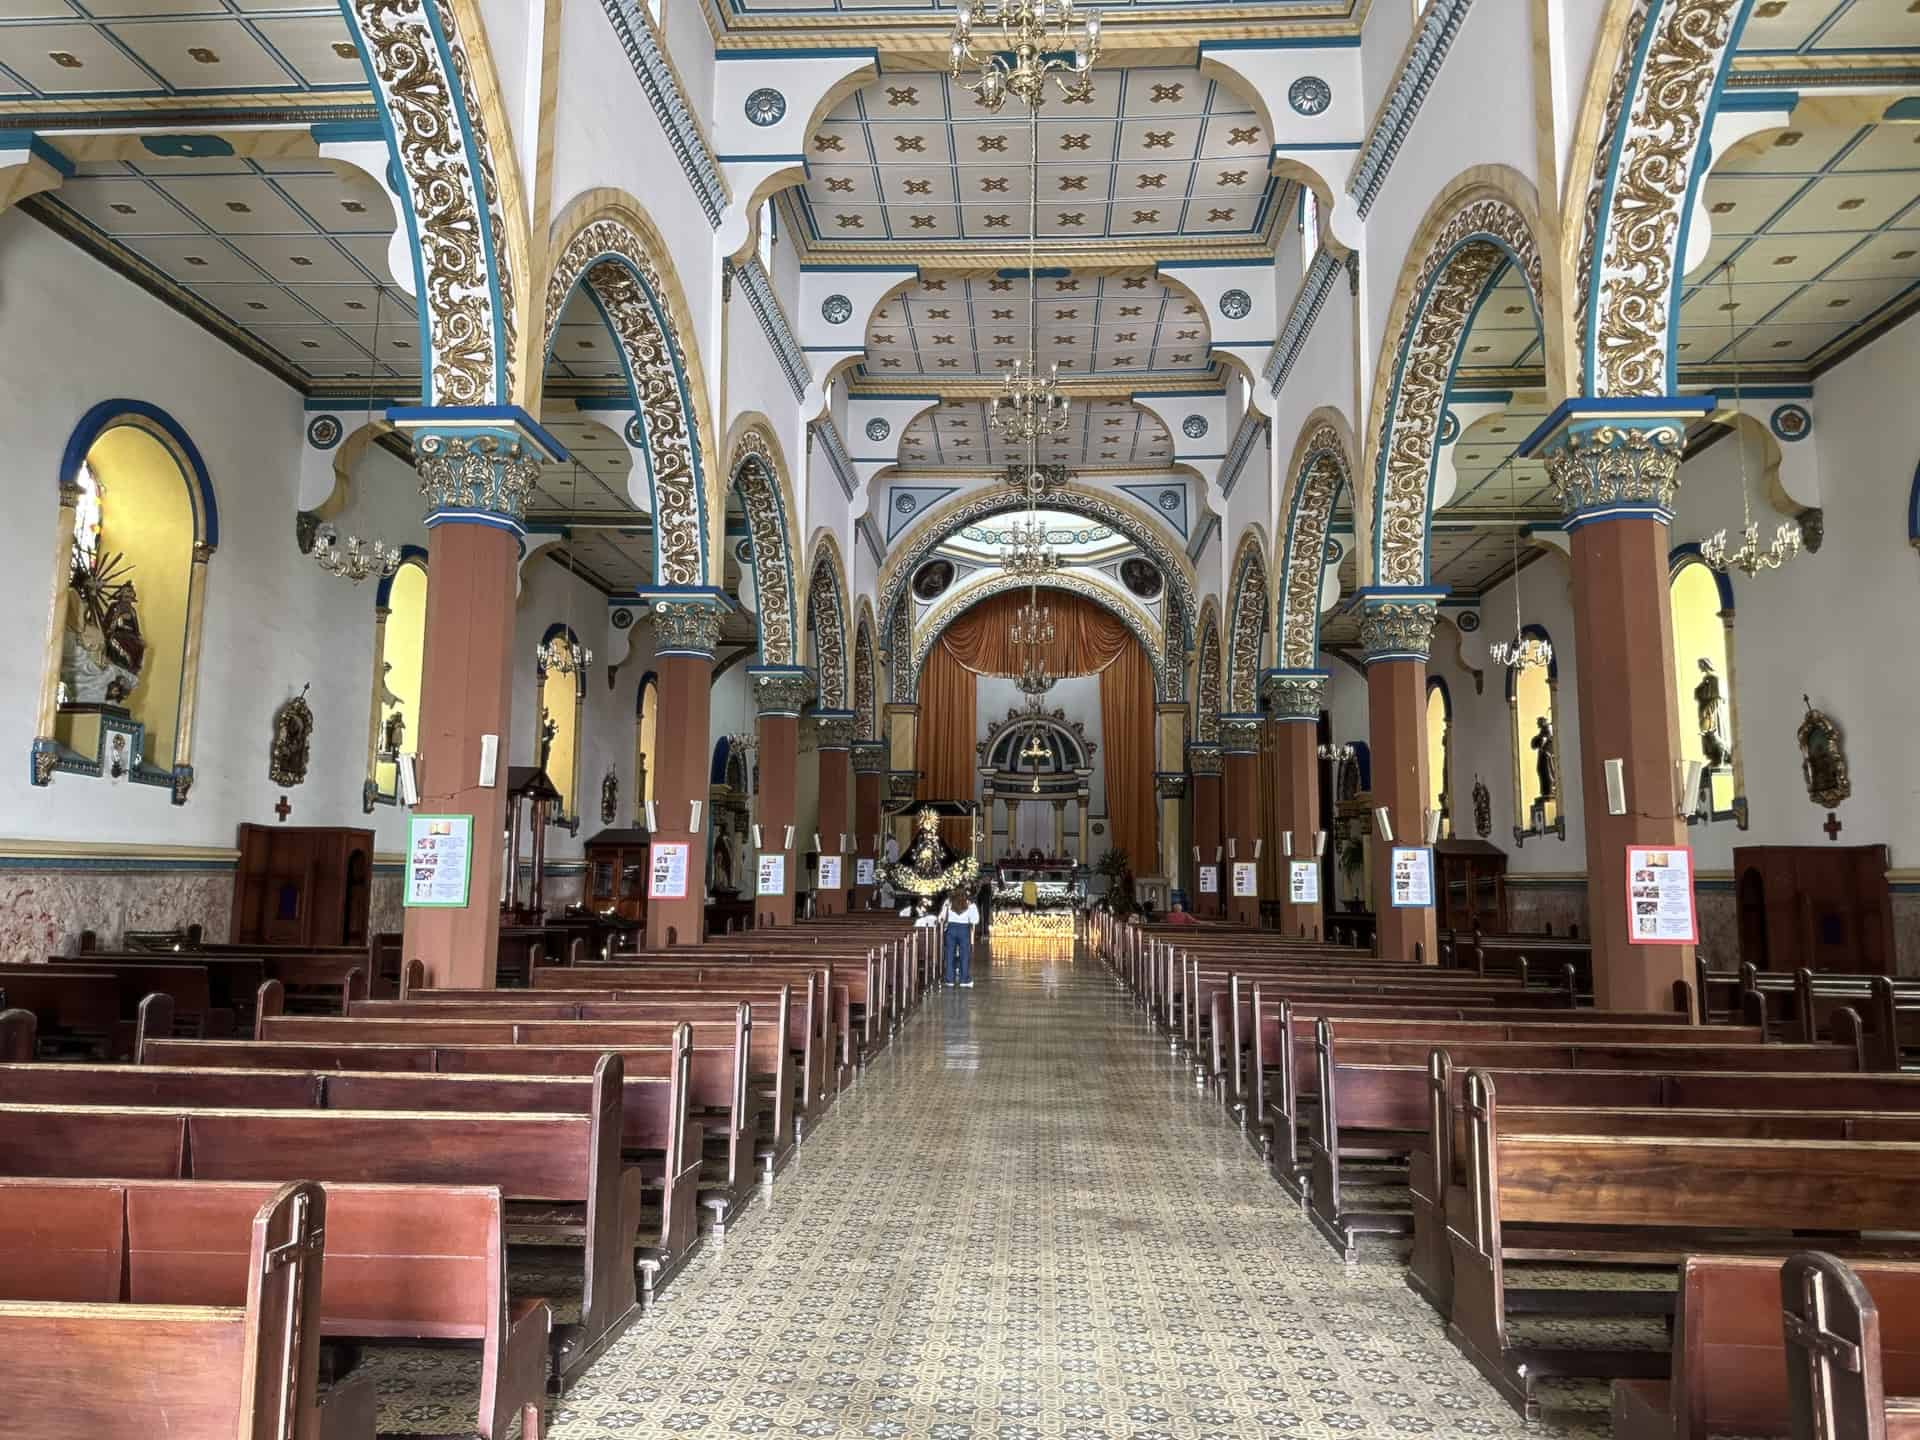 Nave of the Church of the Immaculate Conception in Aguadas, Caldas, Colombia